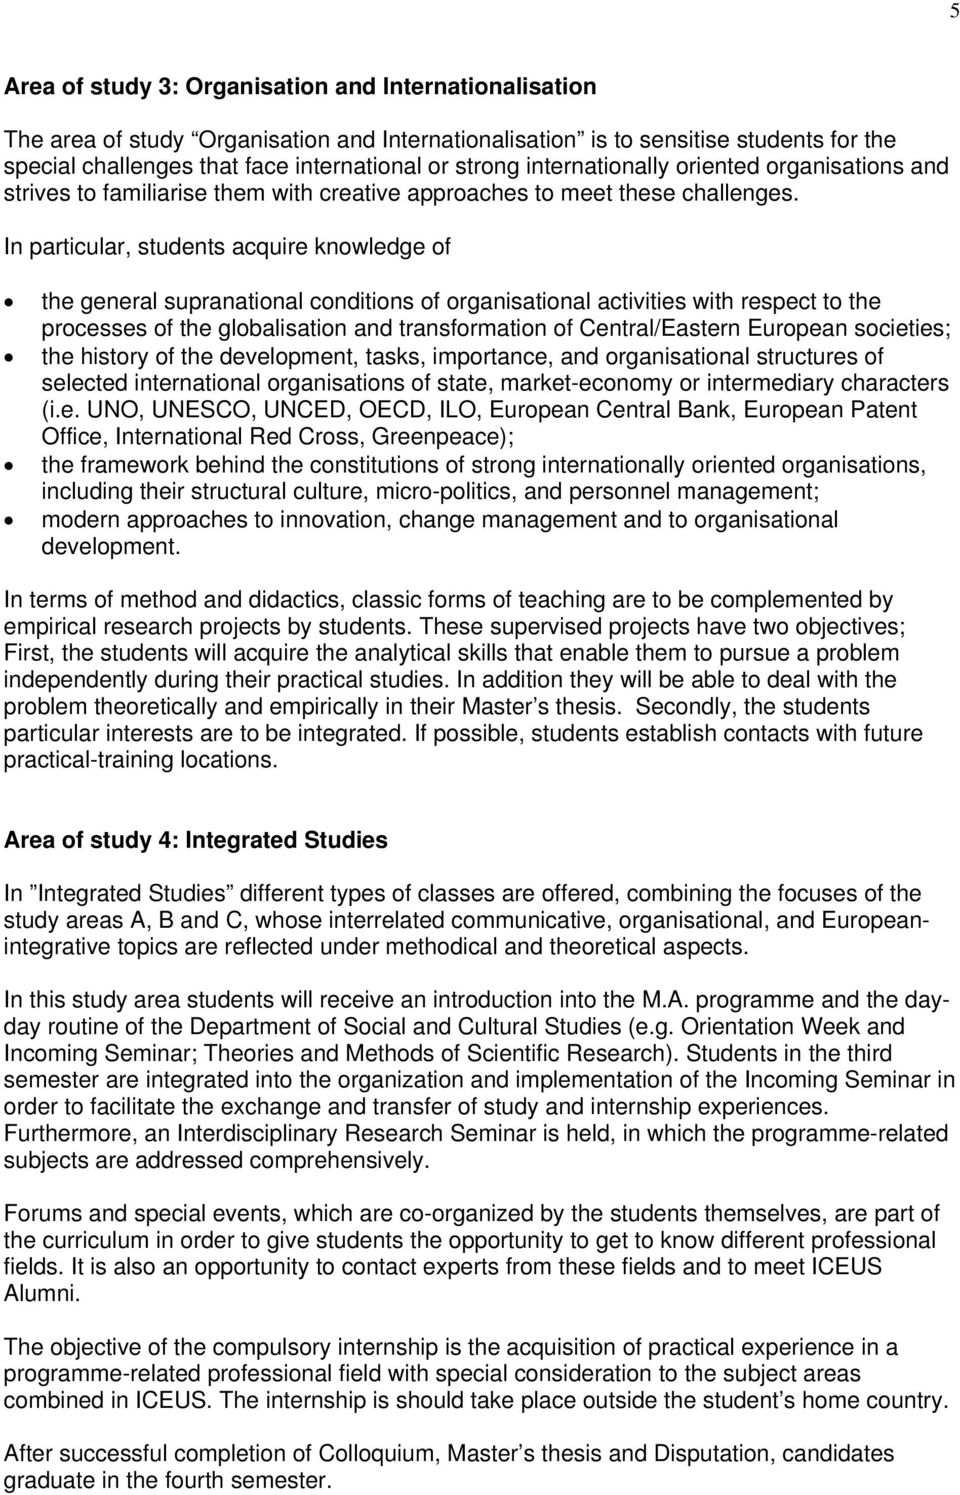 In particular, students acquire knowledge of the general supranational conditions of organisational activities with respect to the processes of the globalisation and transformation of Central/Eastern